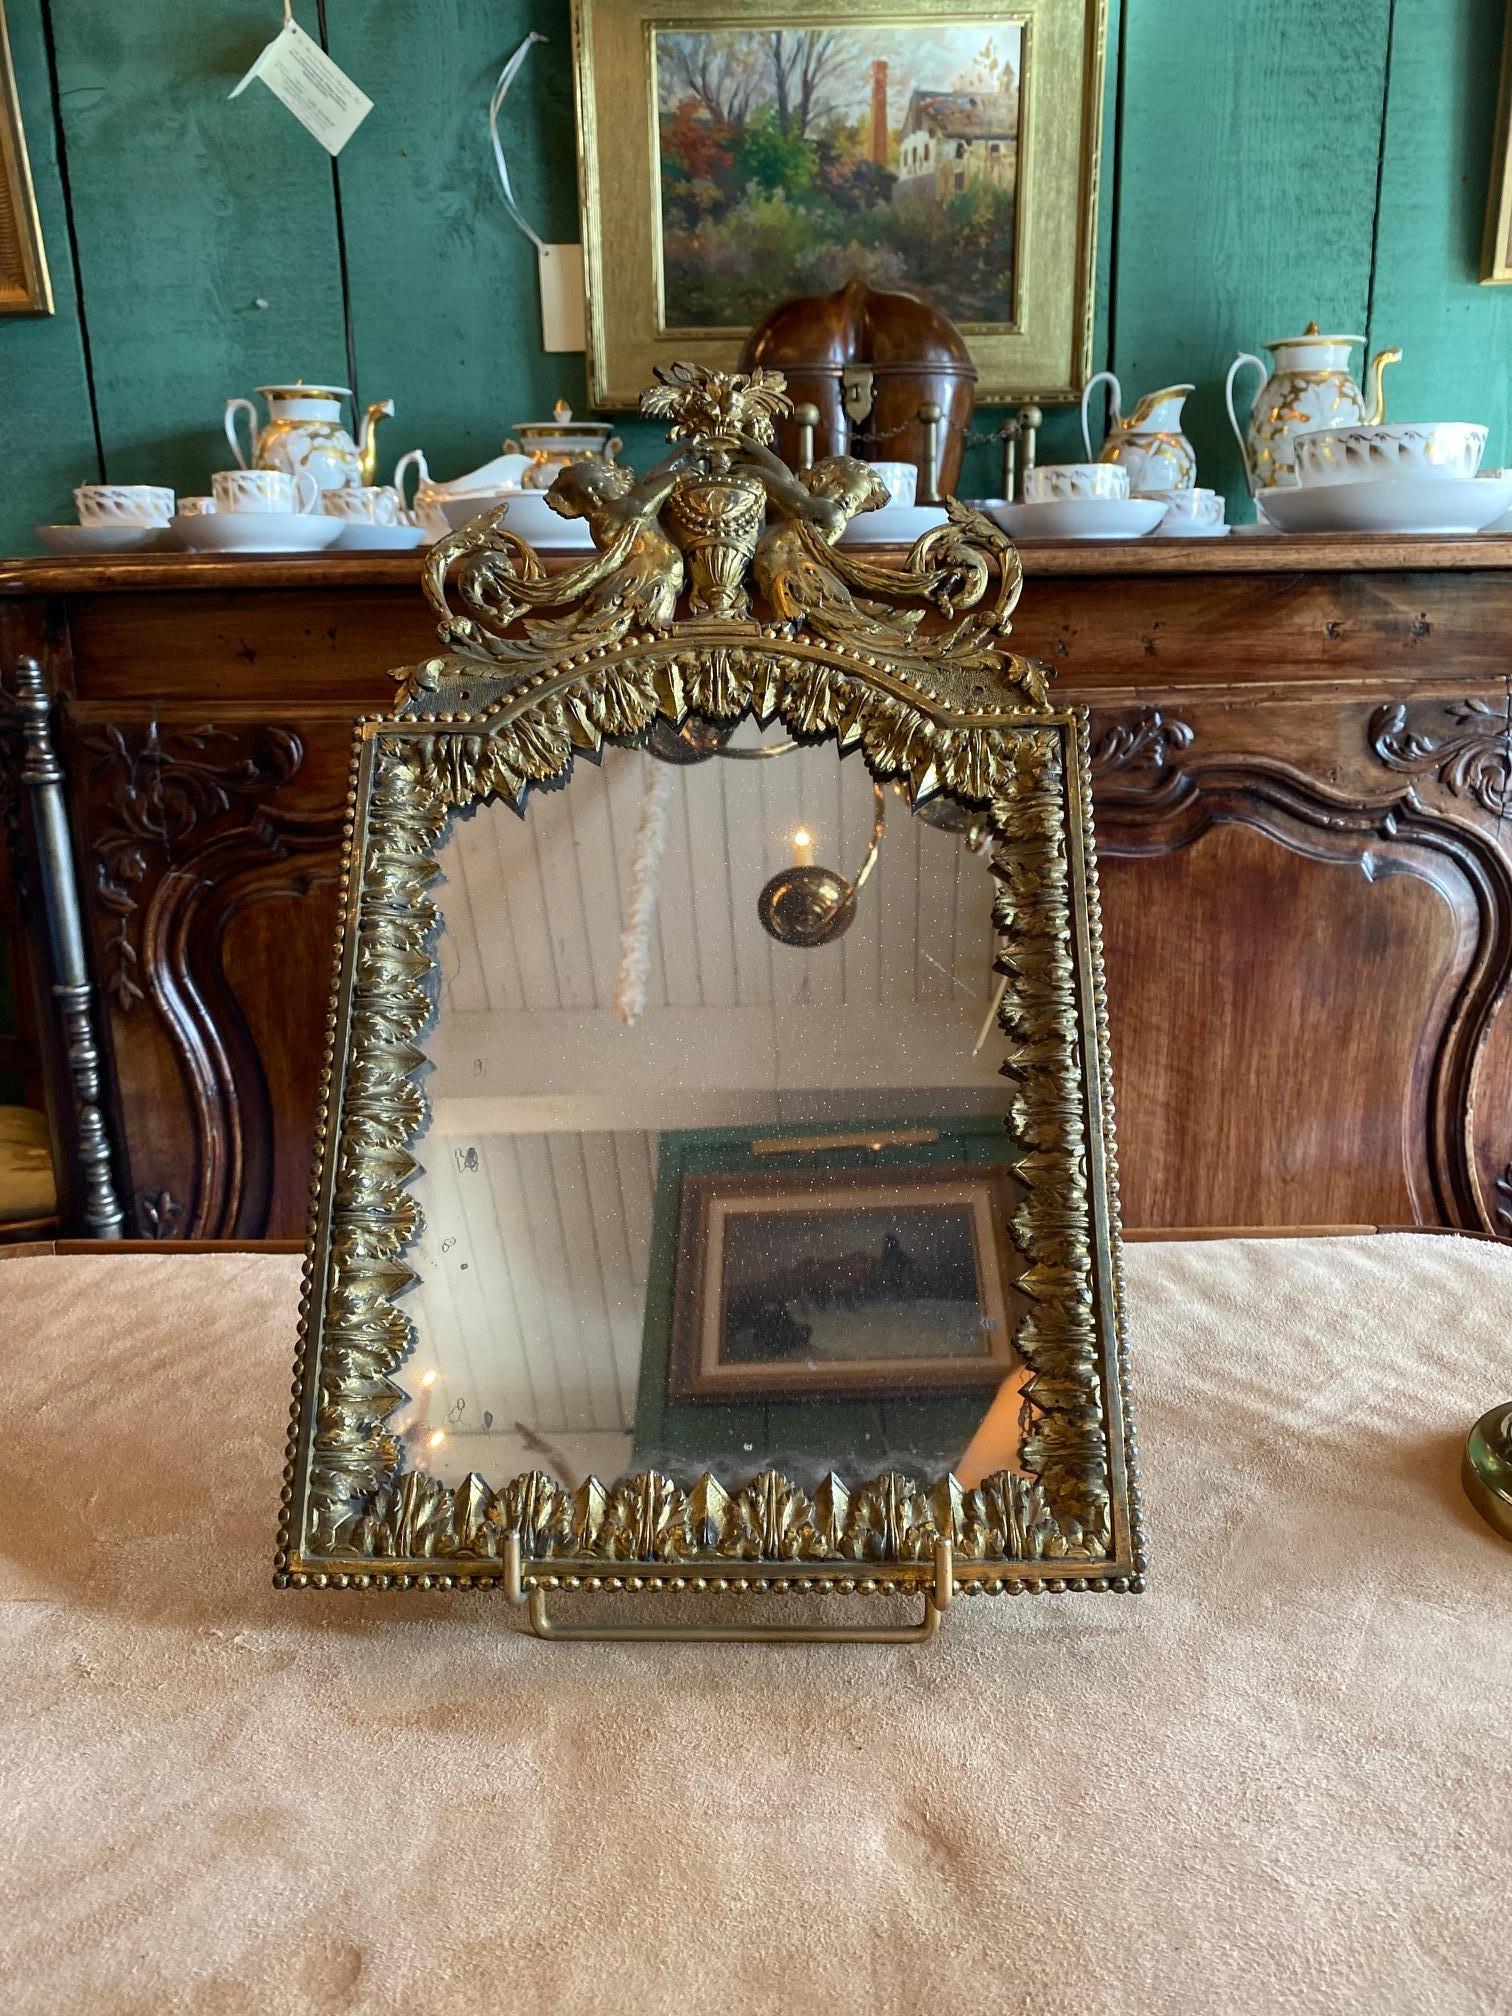 18th C. Antique Gilded Bronze Mirror Glass Desk Console Wall Mount Handcrafted 
A superb handcrafted and gilded bronze, late 17th-18th century period Louis XVI antique mirror with original decorative top side’s bottom and back France. It’s like a